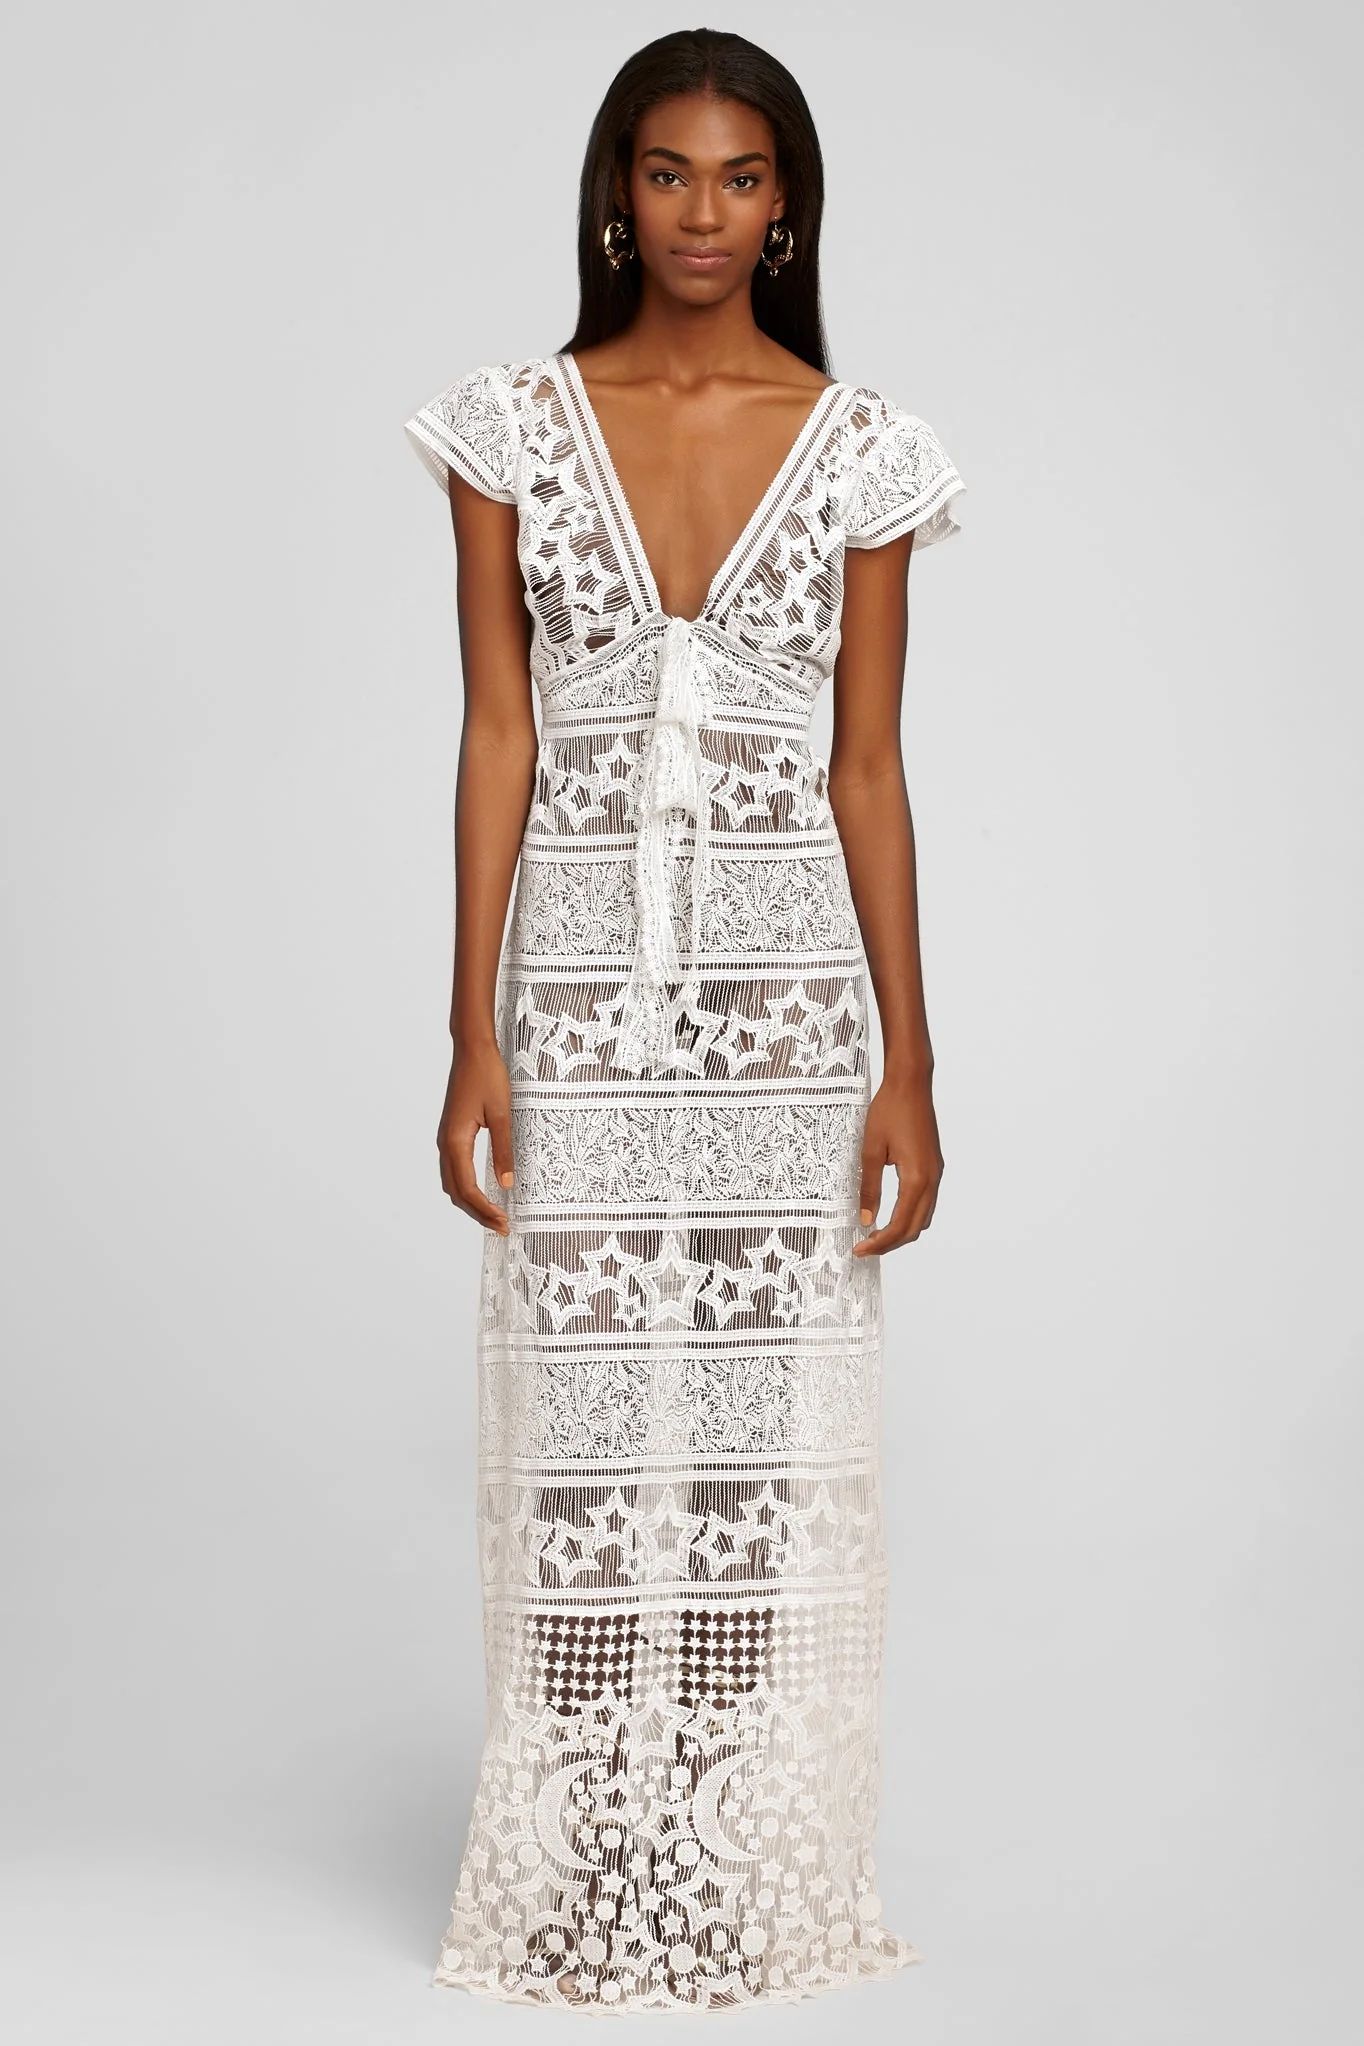 Reina Starlight Lace Dress by Miguelina | Support HerStory